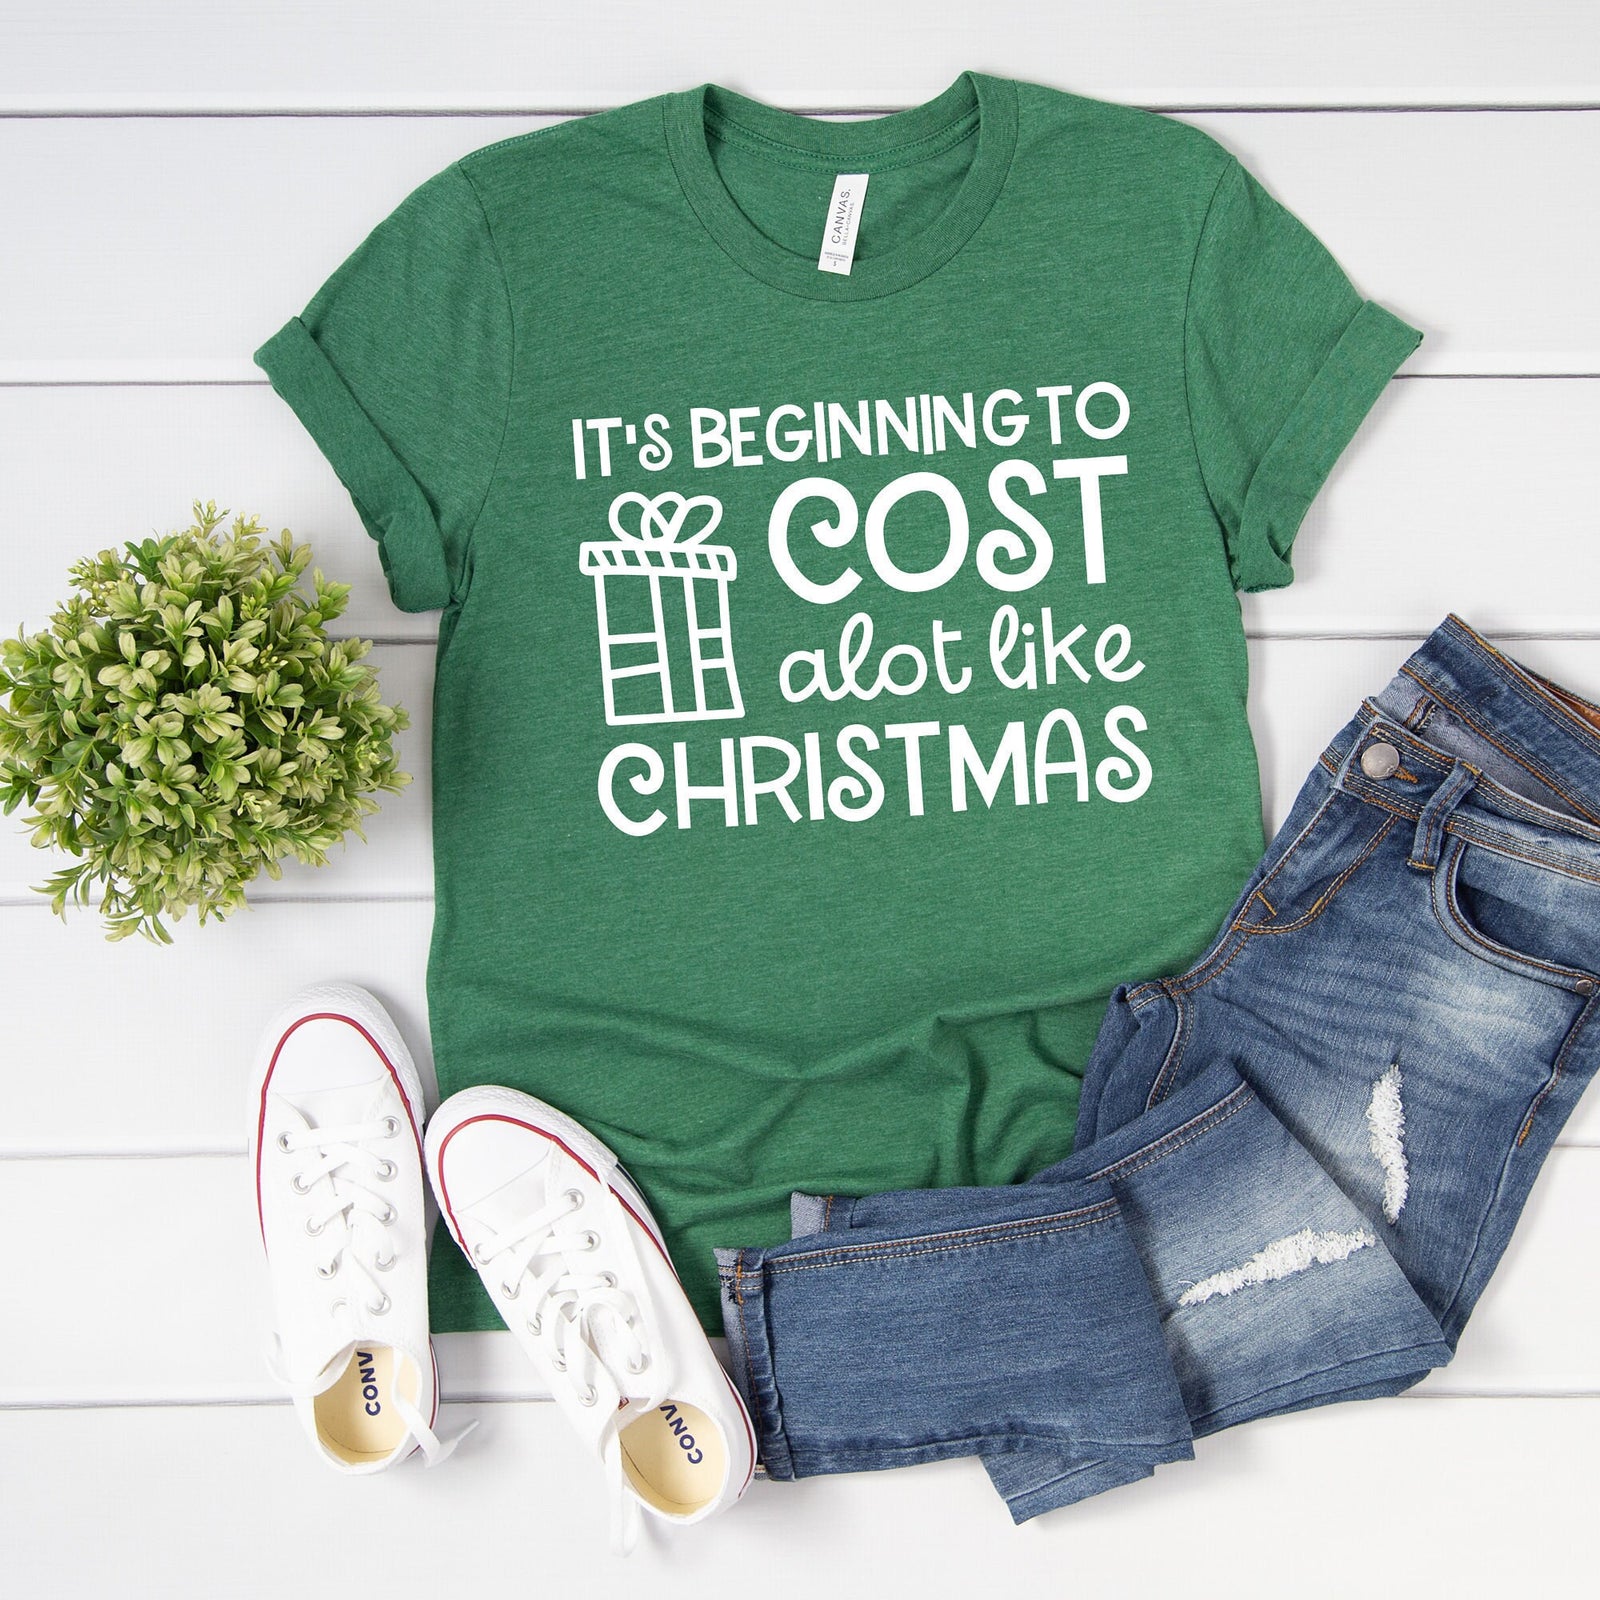 It's Beginning to Cost A lot like Christmas T Shirt - Funny Christmas T Shirt- Christmas Statement Shirt - Christmas Santa Shirt